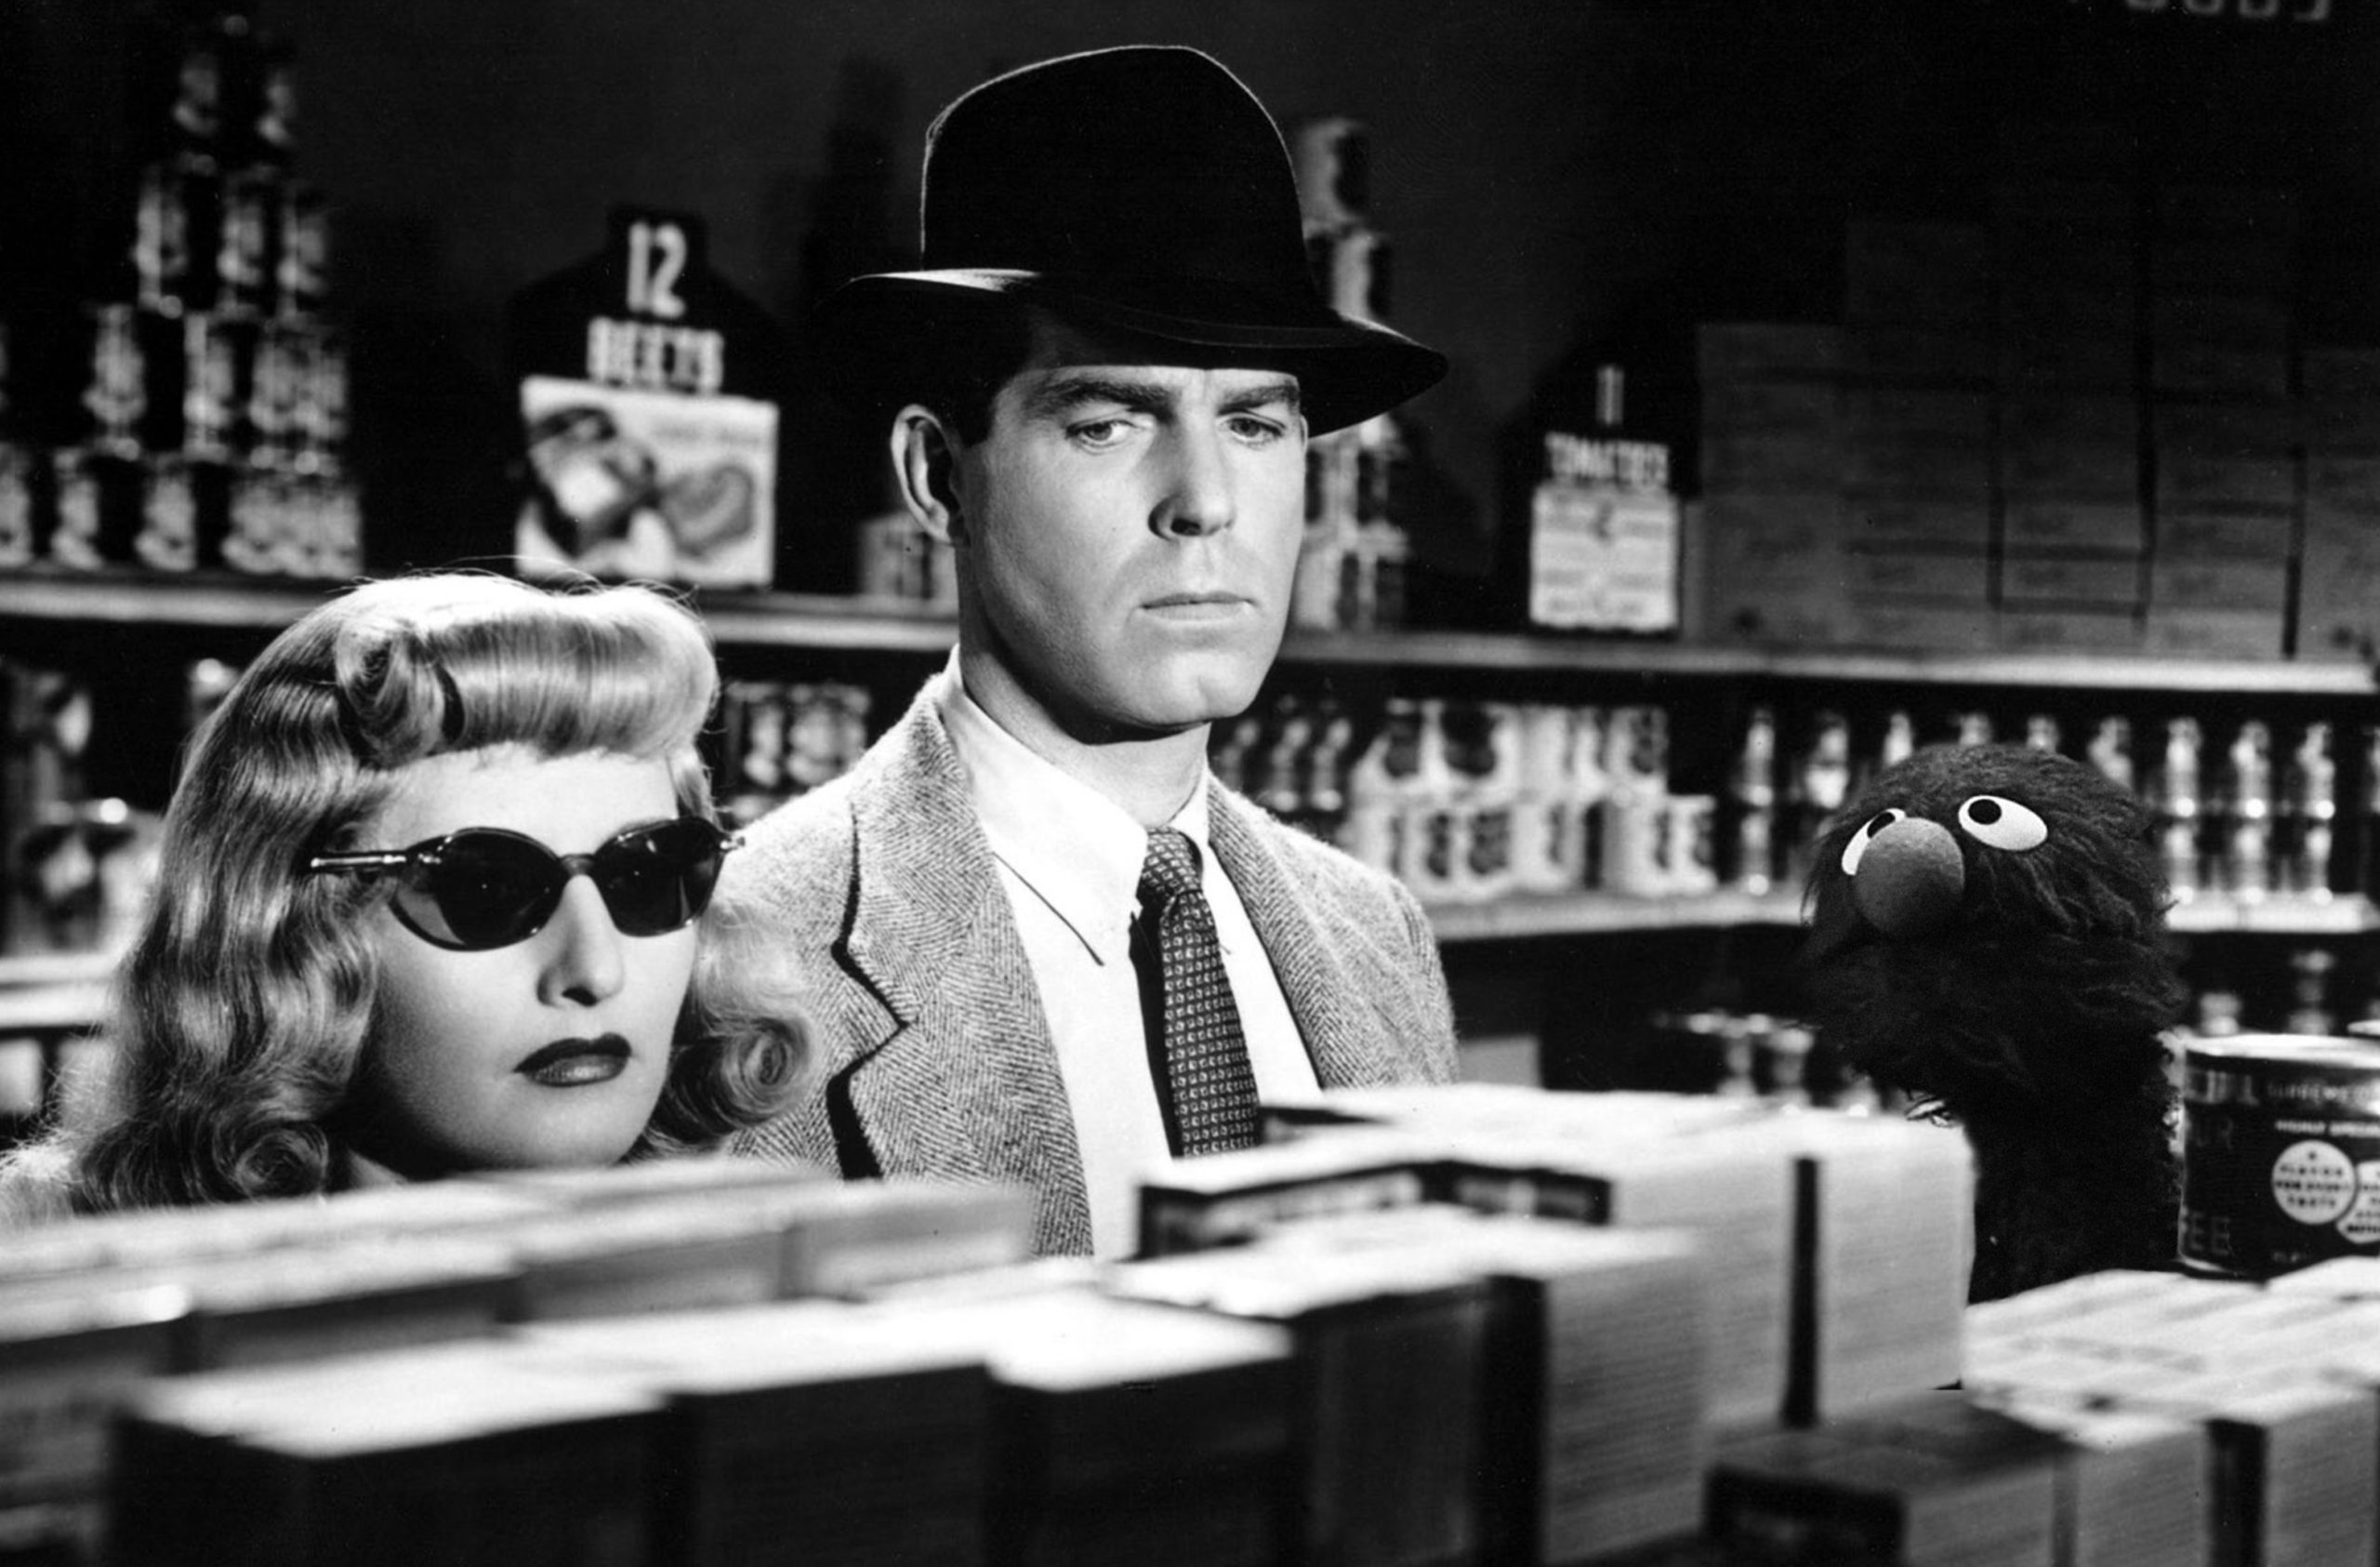 Barbara Satanwyck, Fred MacMurray, and Grover in the grocery store scene from Double Indemnity.